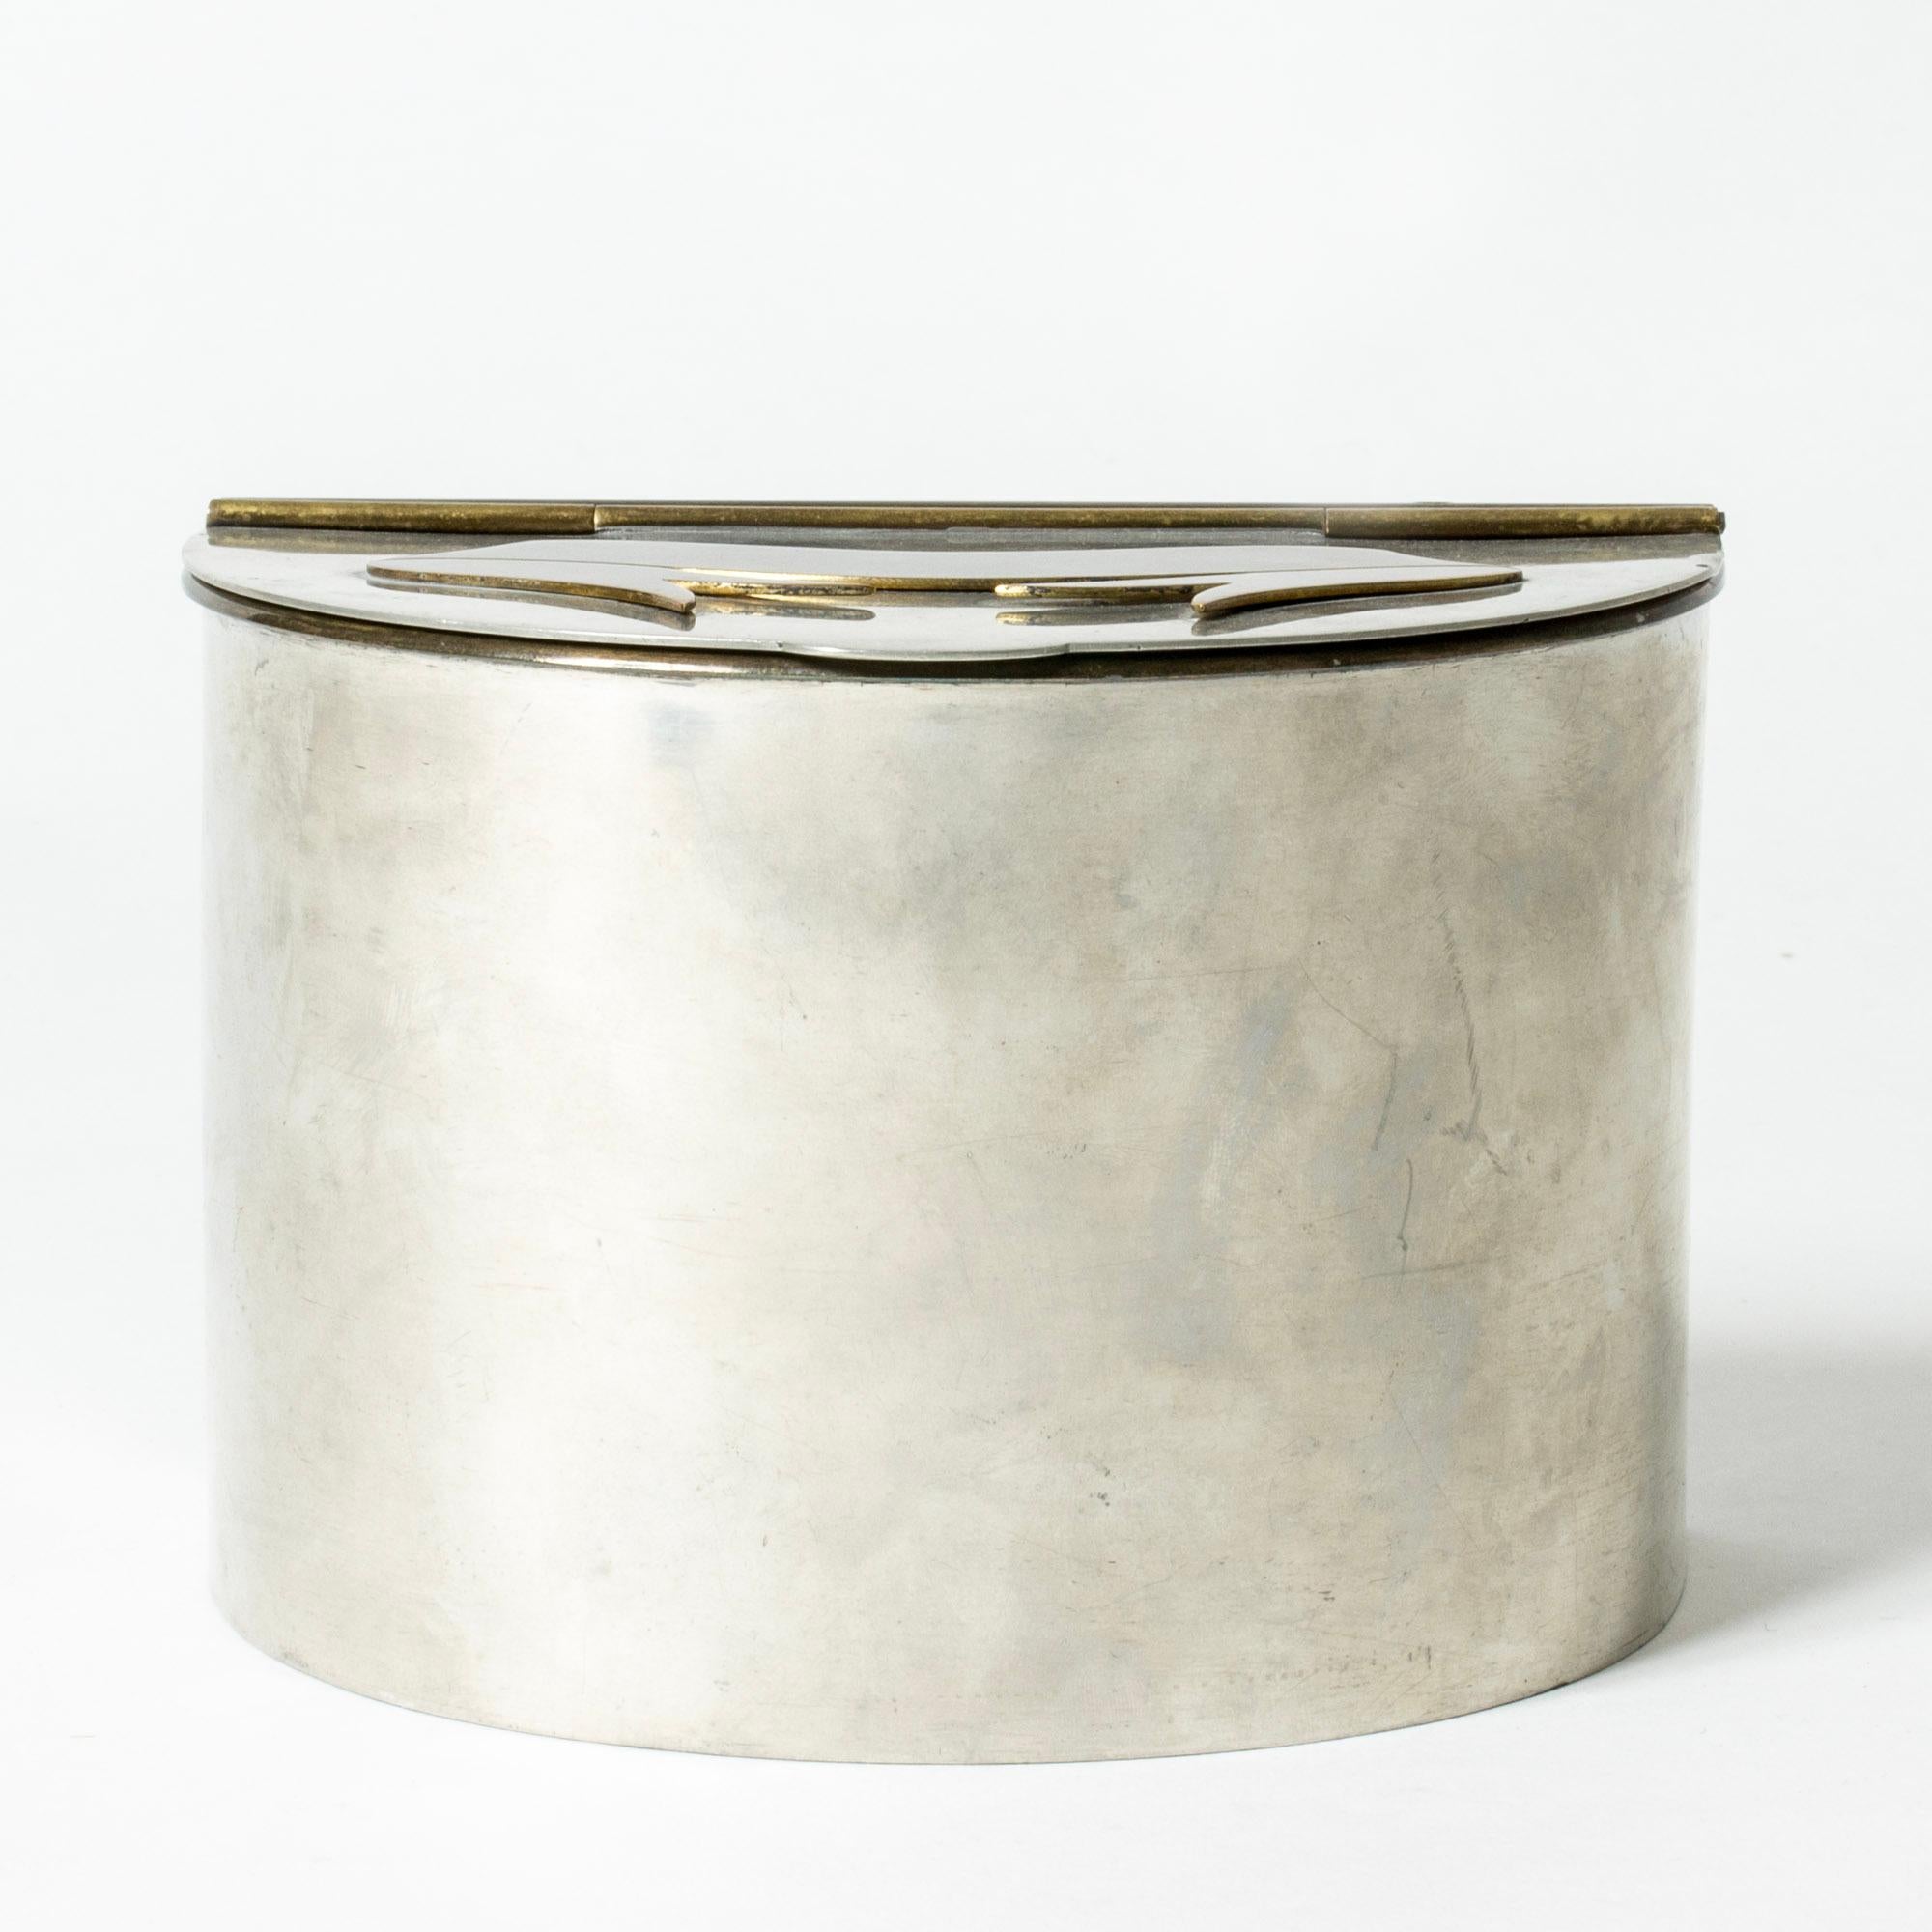 Lovely pewter jar by Estrid Ericson, in a sleek form adorned with a brass bow on the lid.